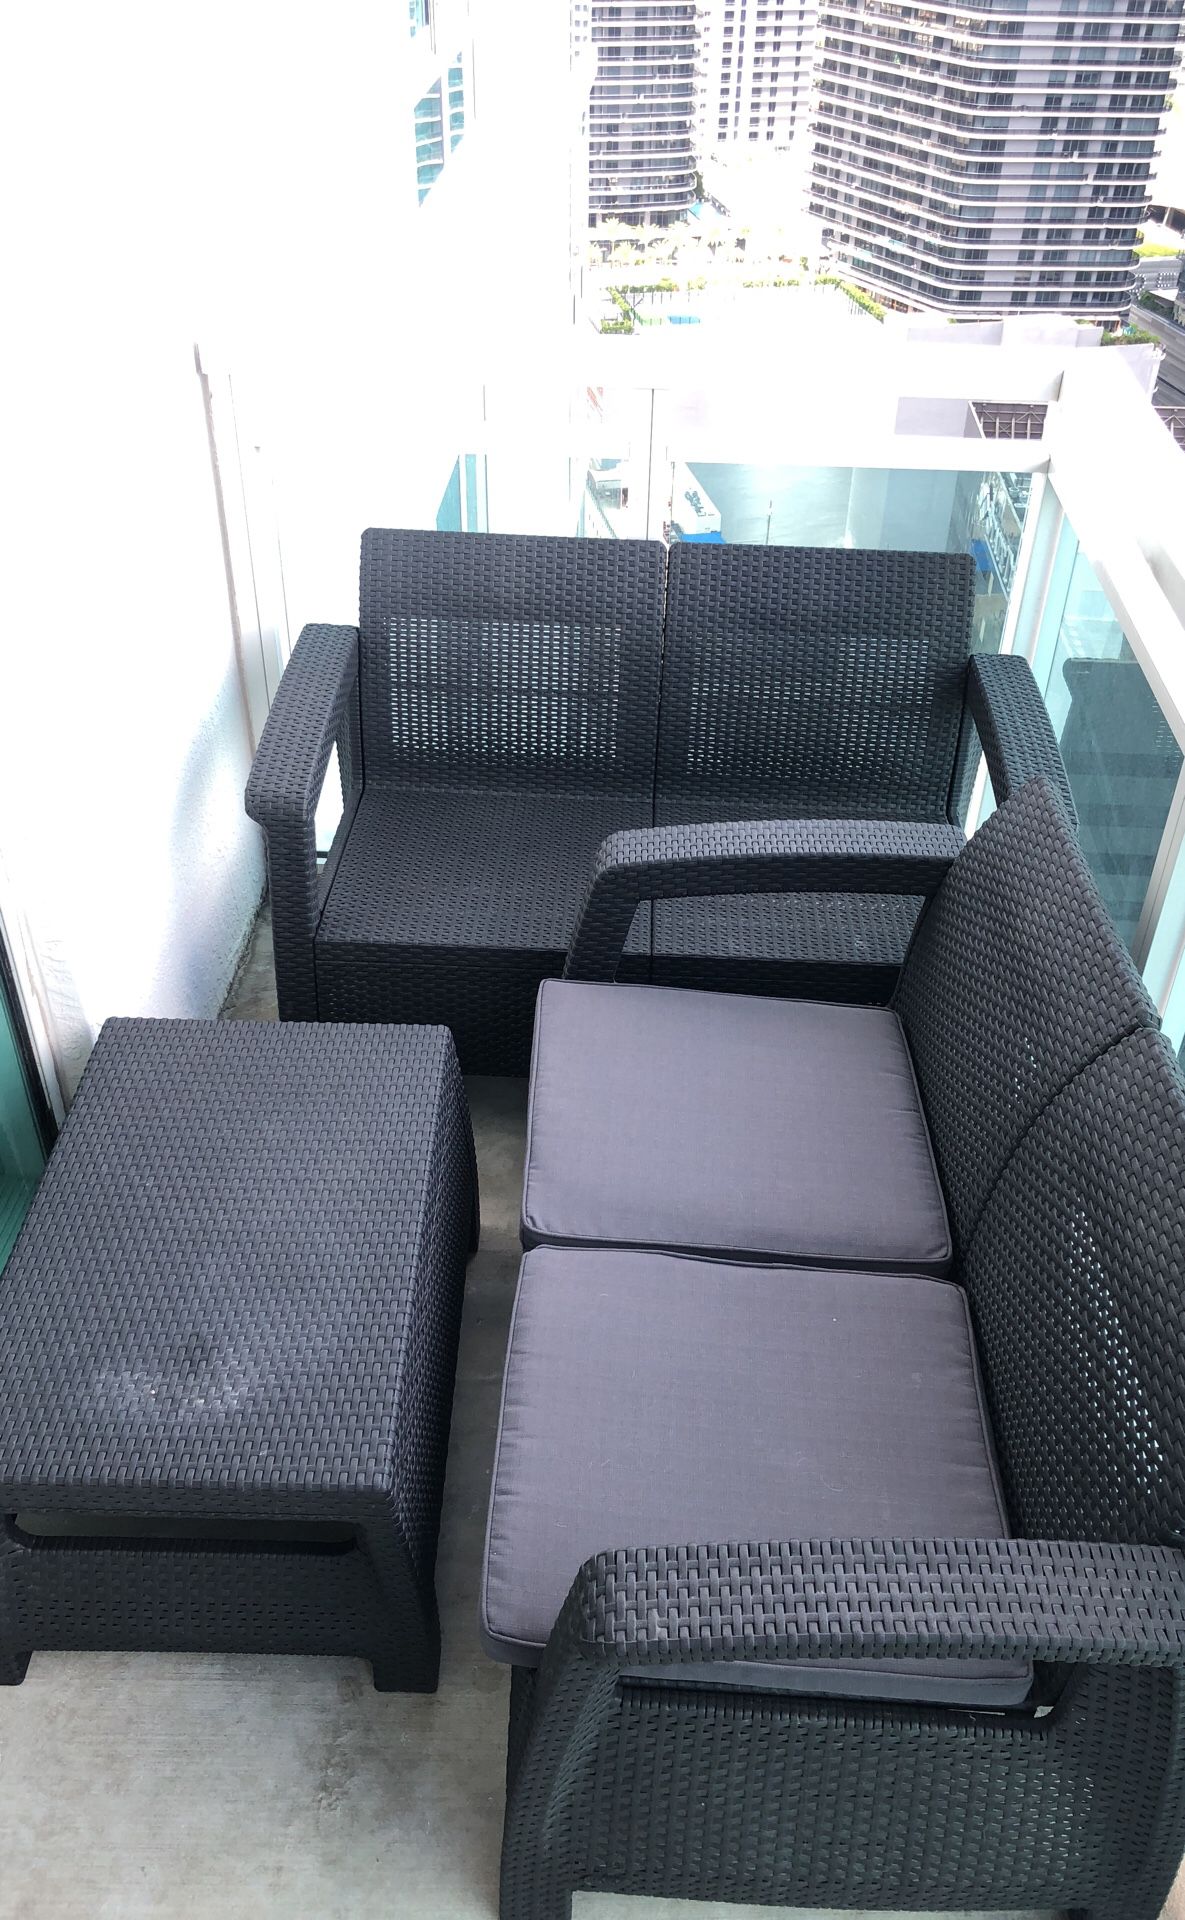 Outdoor Patio couches